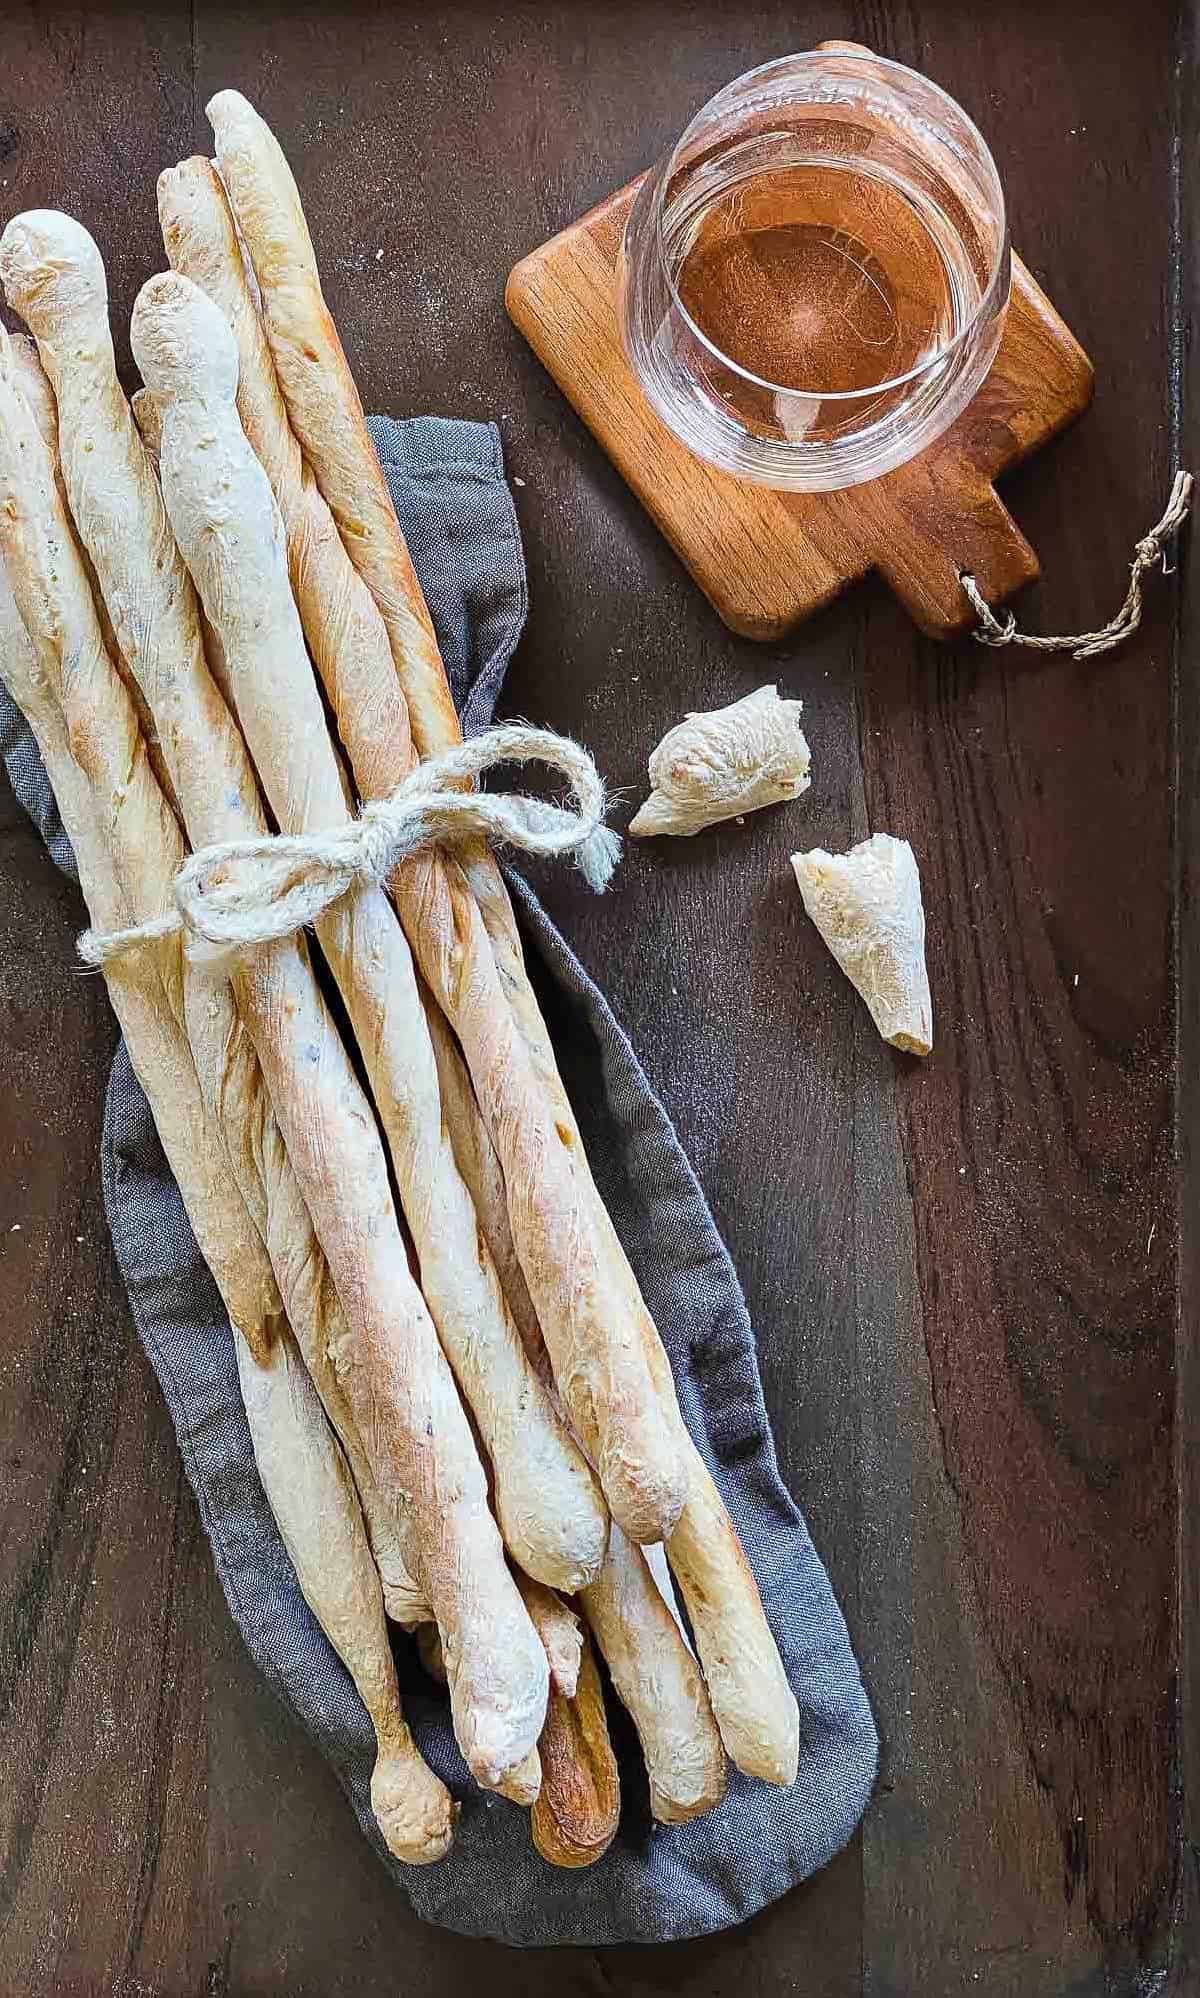  Get ready to impress your friends with your homemade sourdough breadsticks.